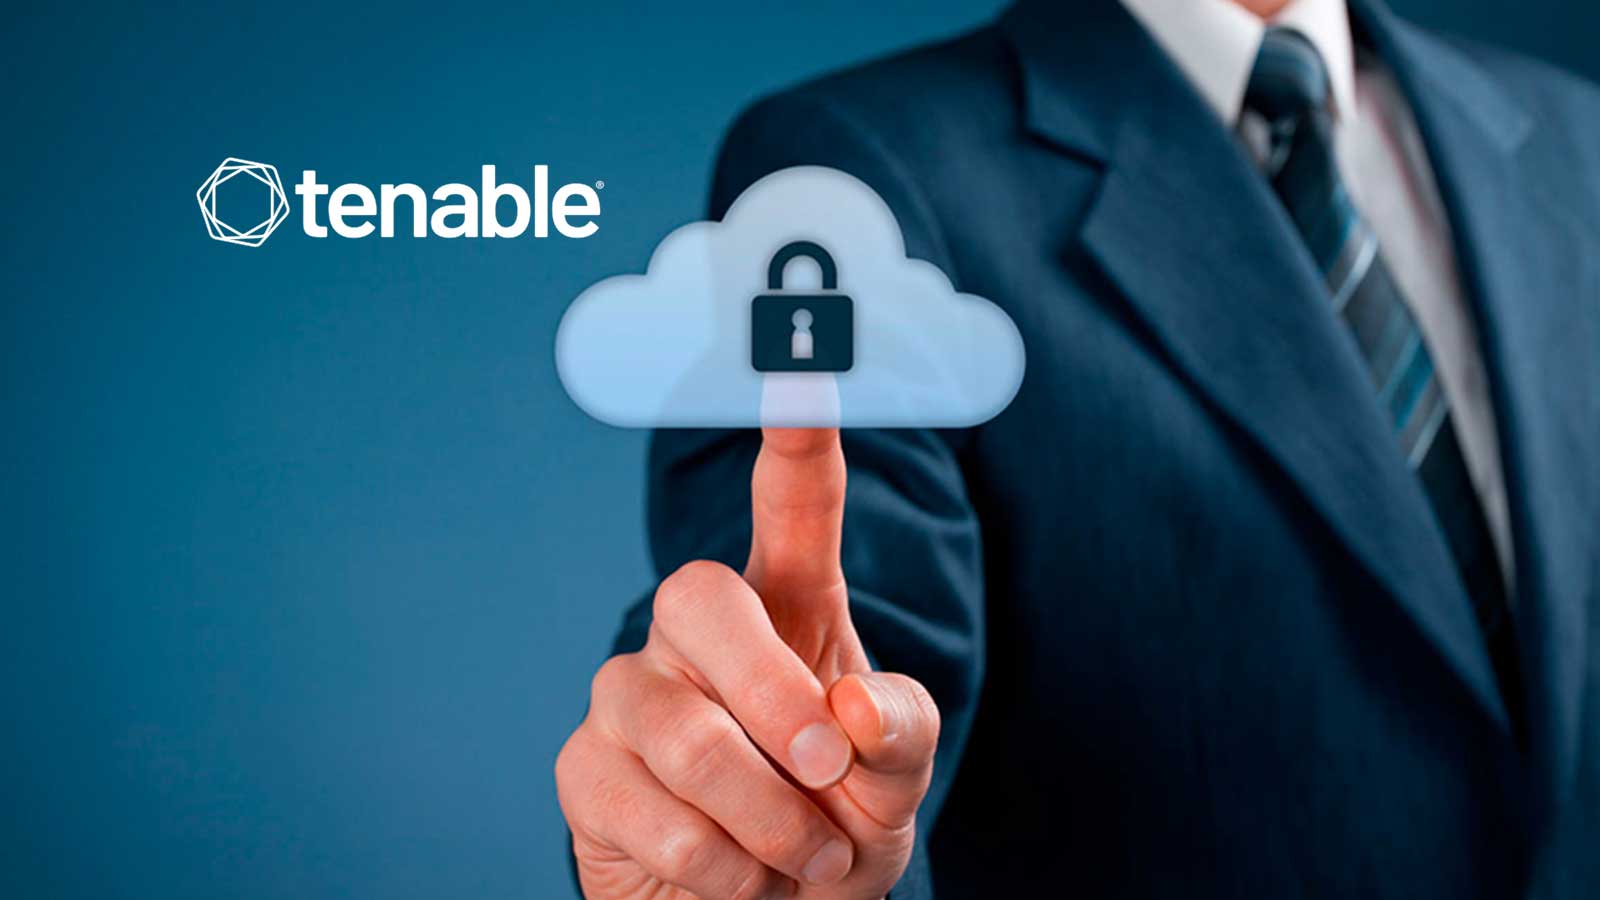 Tenable Achieves FedRAMP “Ready” Designation for Tenable Cloud Security